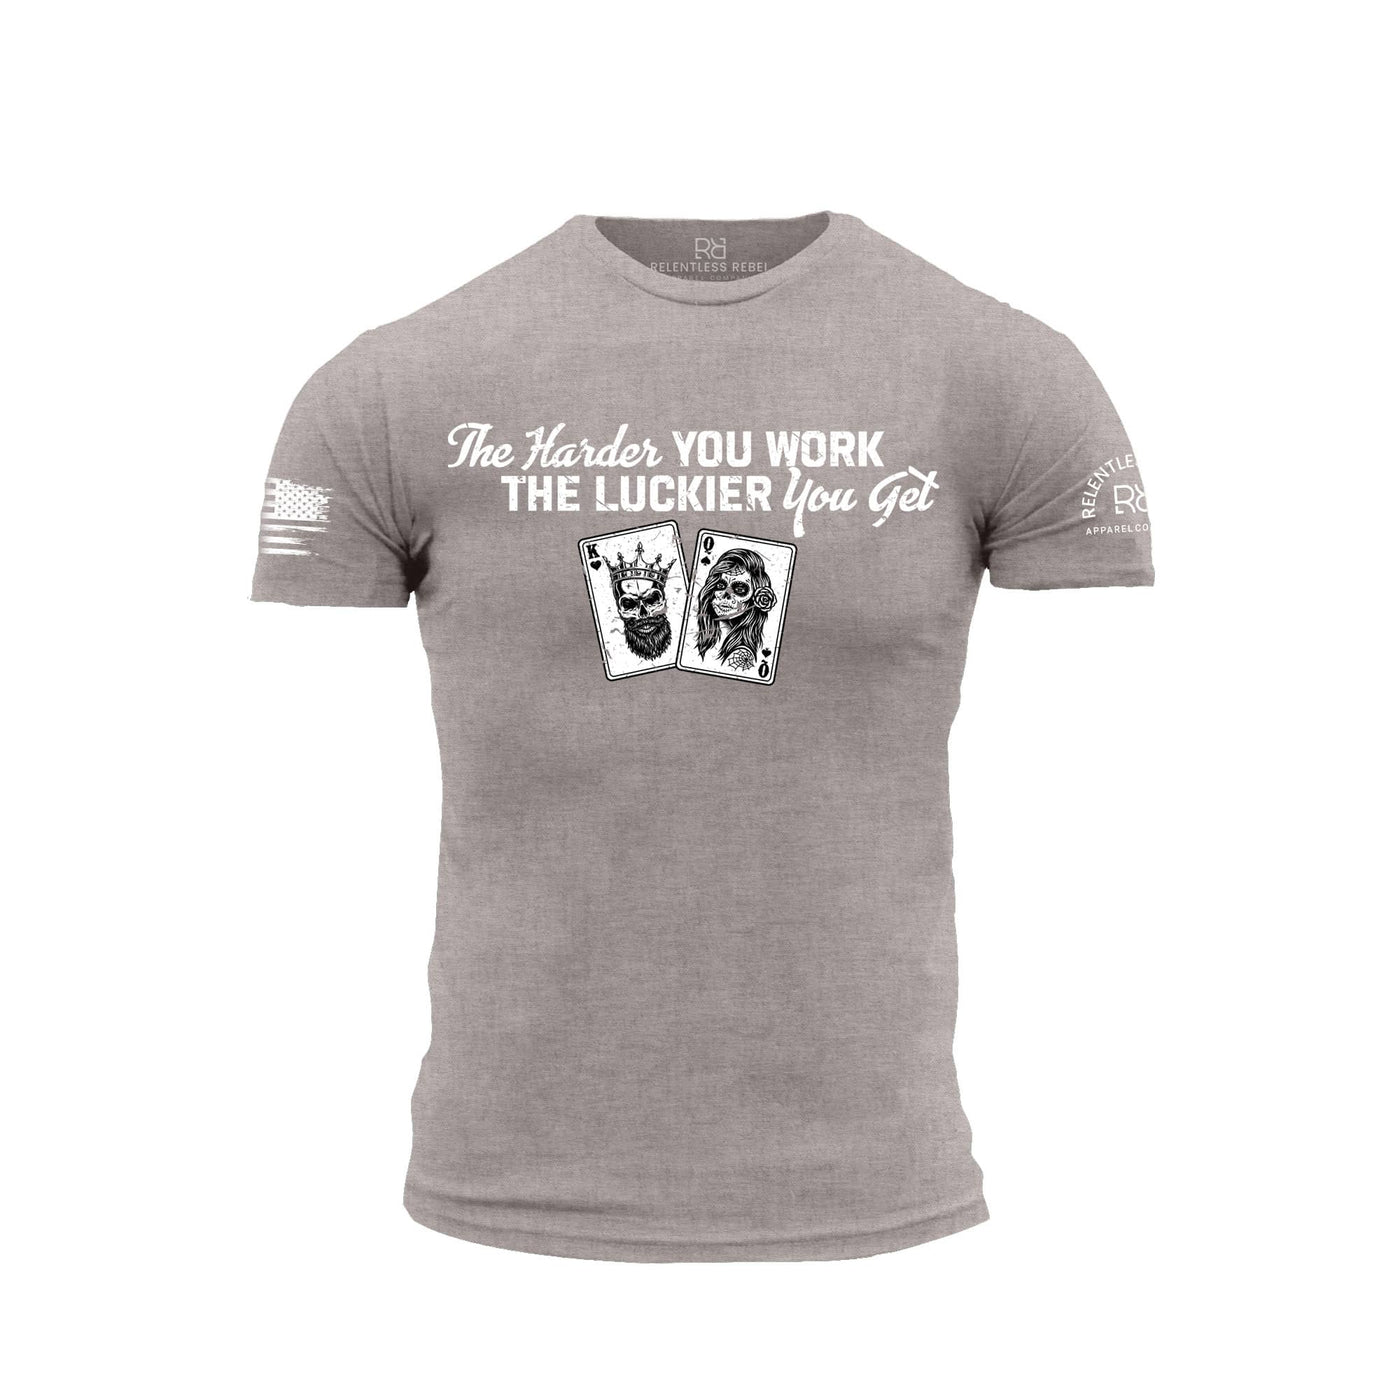 Heather Stone Men's The Harder You Work Front Design Tee